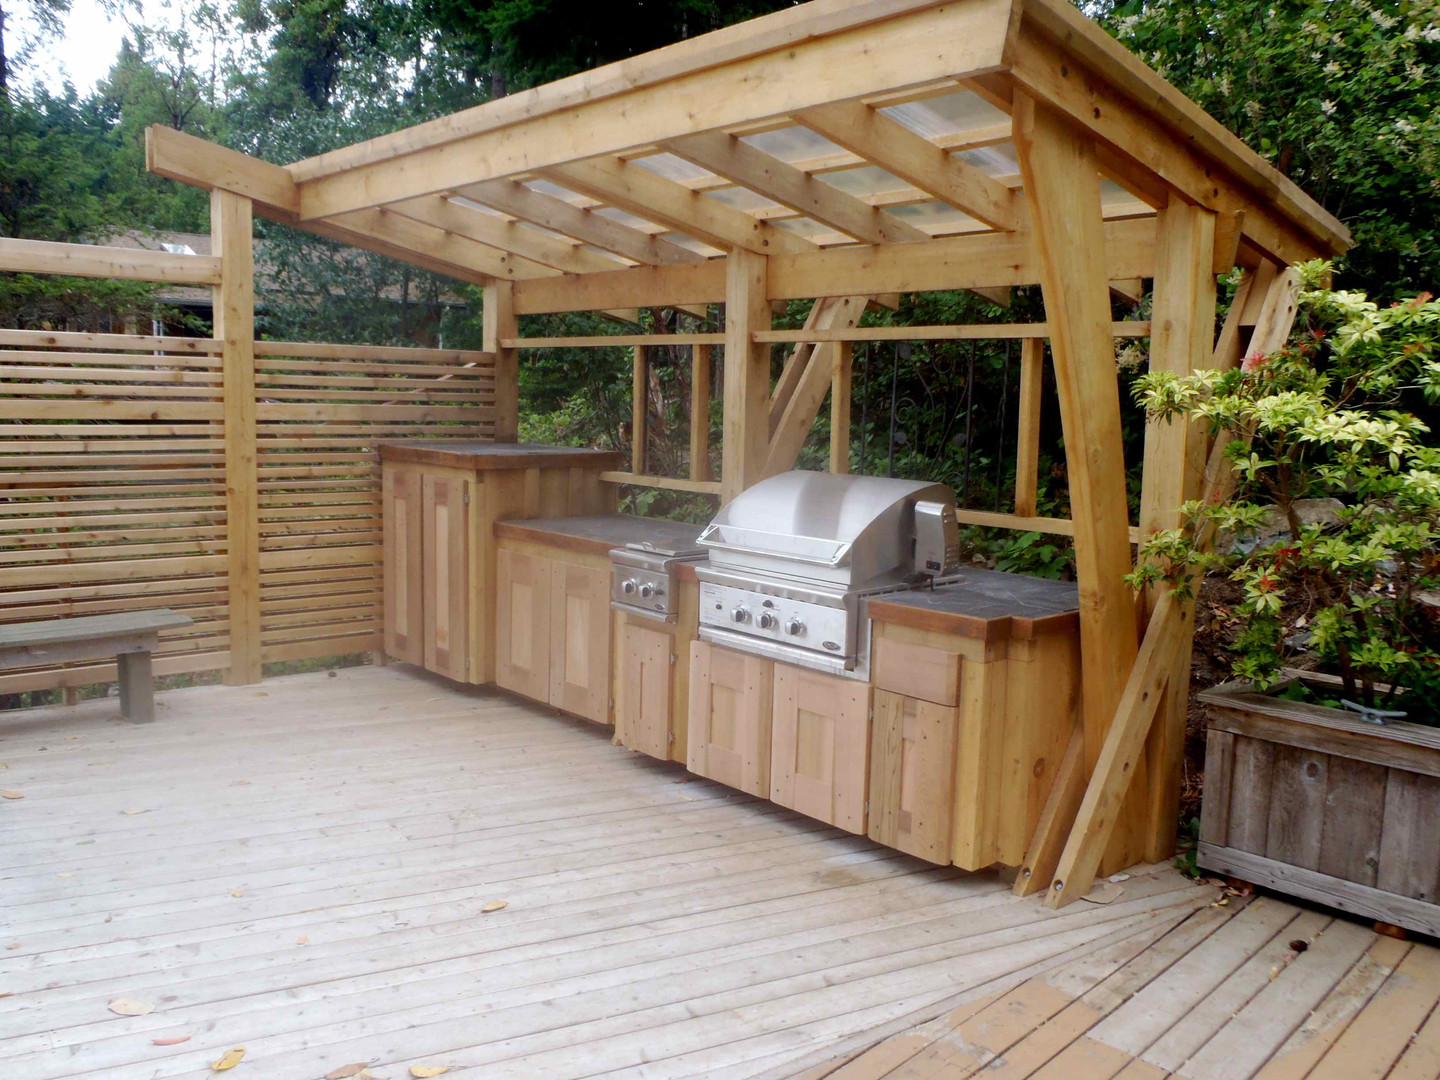 Build An Outdoor Kitchen
 These DIY Outdoor Kitchen Plans Turn Your Backyard Into